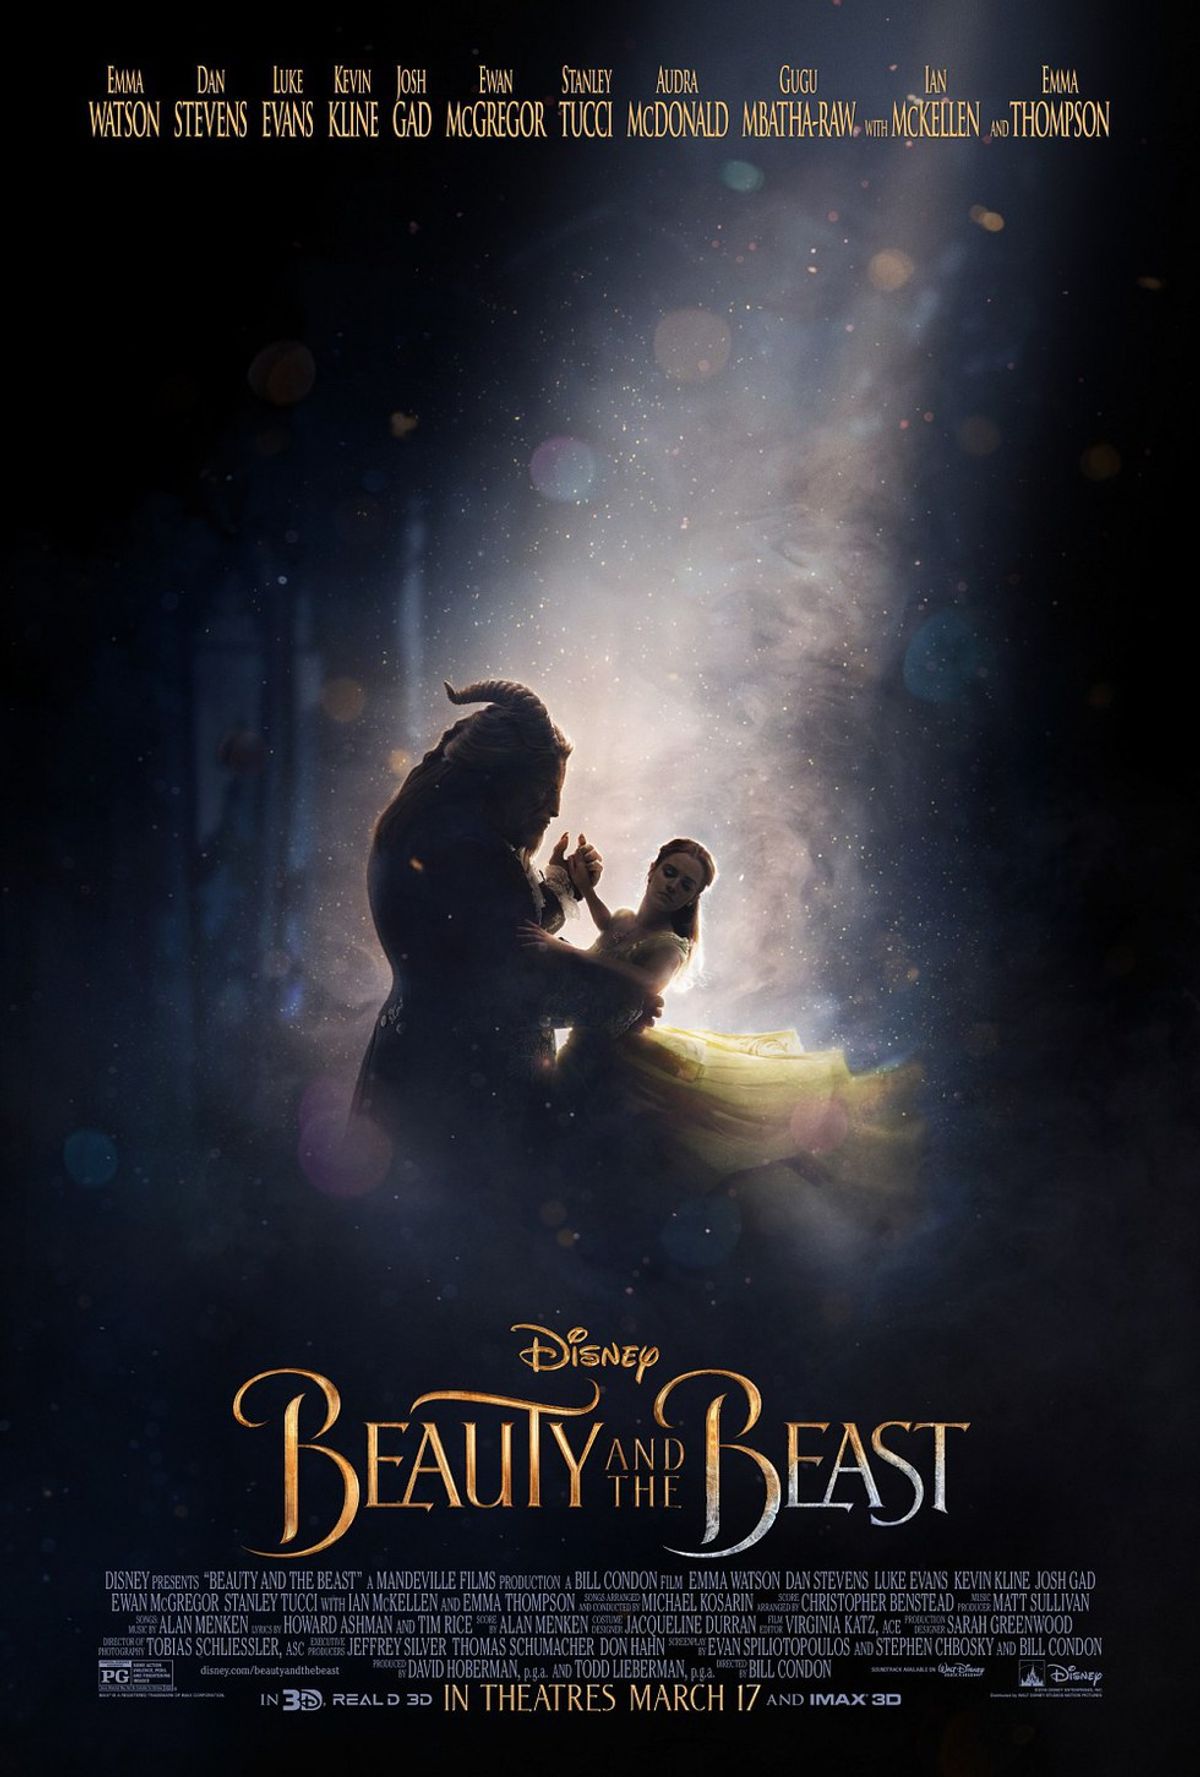 Beauty and the Beast Trailer Beats Fifty Shades and Star Wars for Most Views